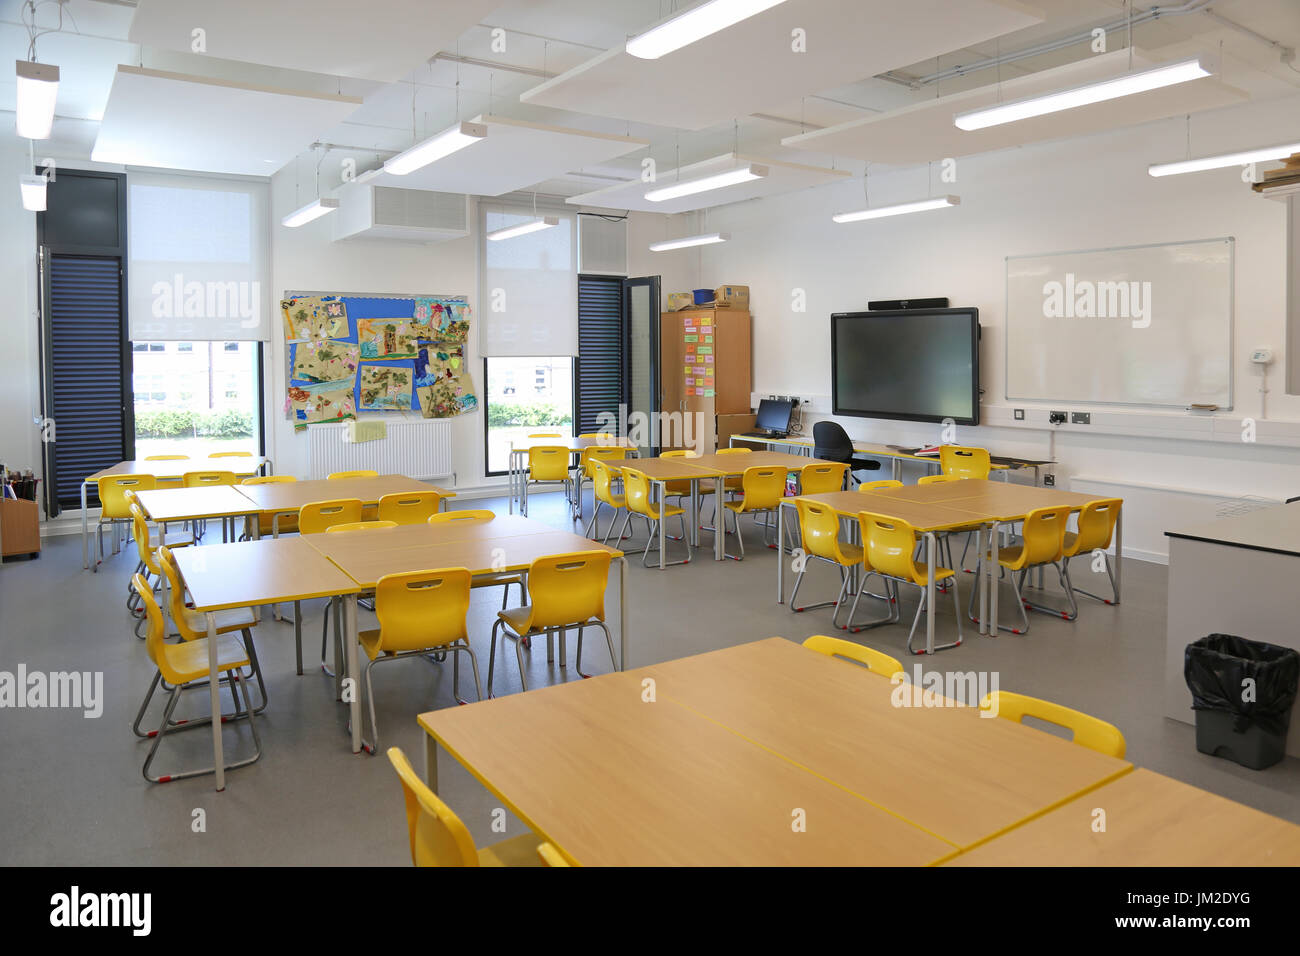 Interior of a classroom in a newly built primary school in eastern London, UK. Shows desks, chairs and large TV monitor screen.Empty, no pupils. Stock Photo